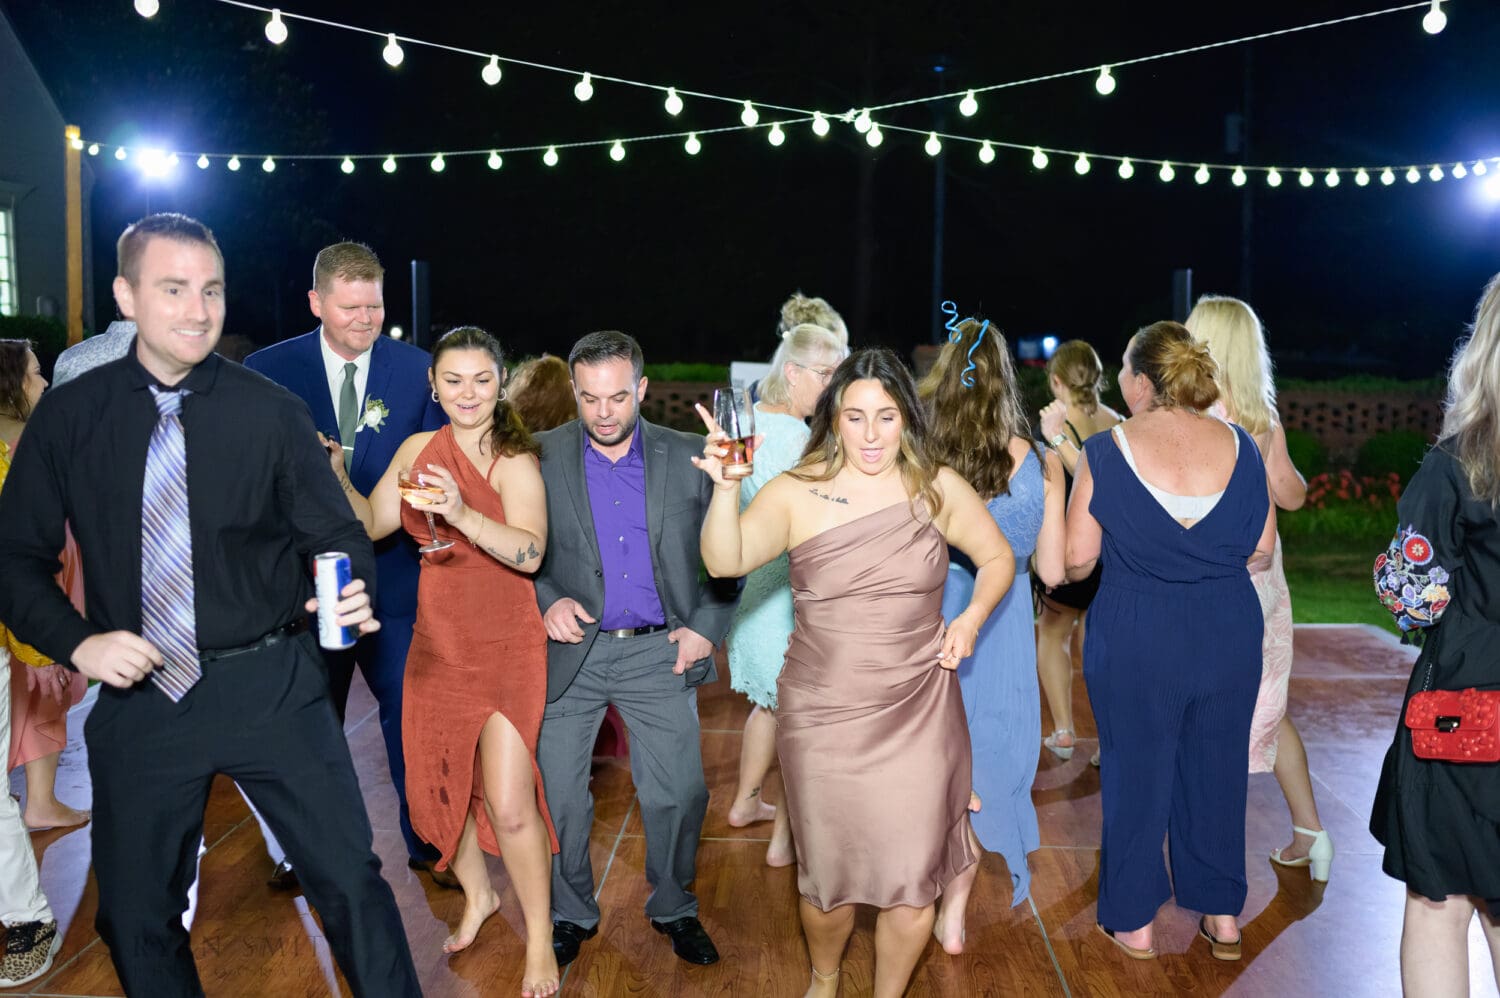 Fun on the dance floor outdoors - Pine Lakes Country Club